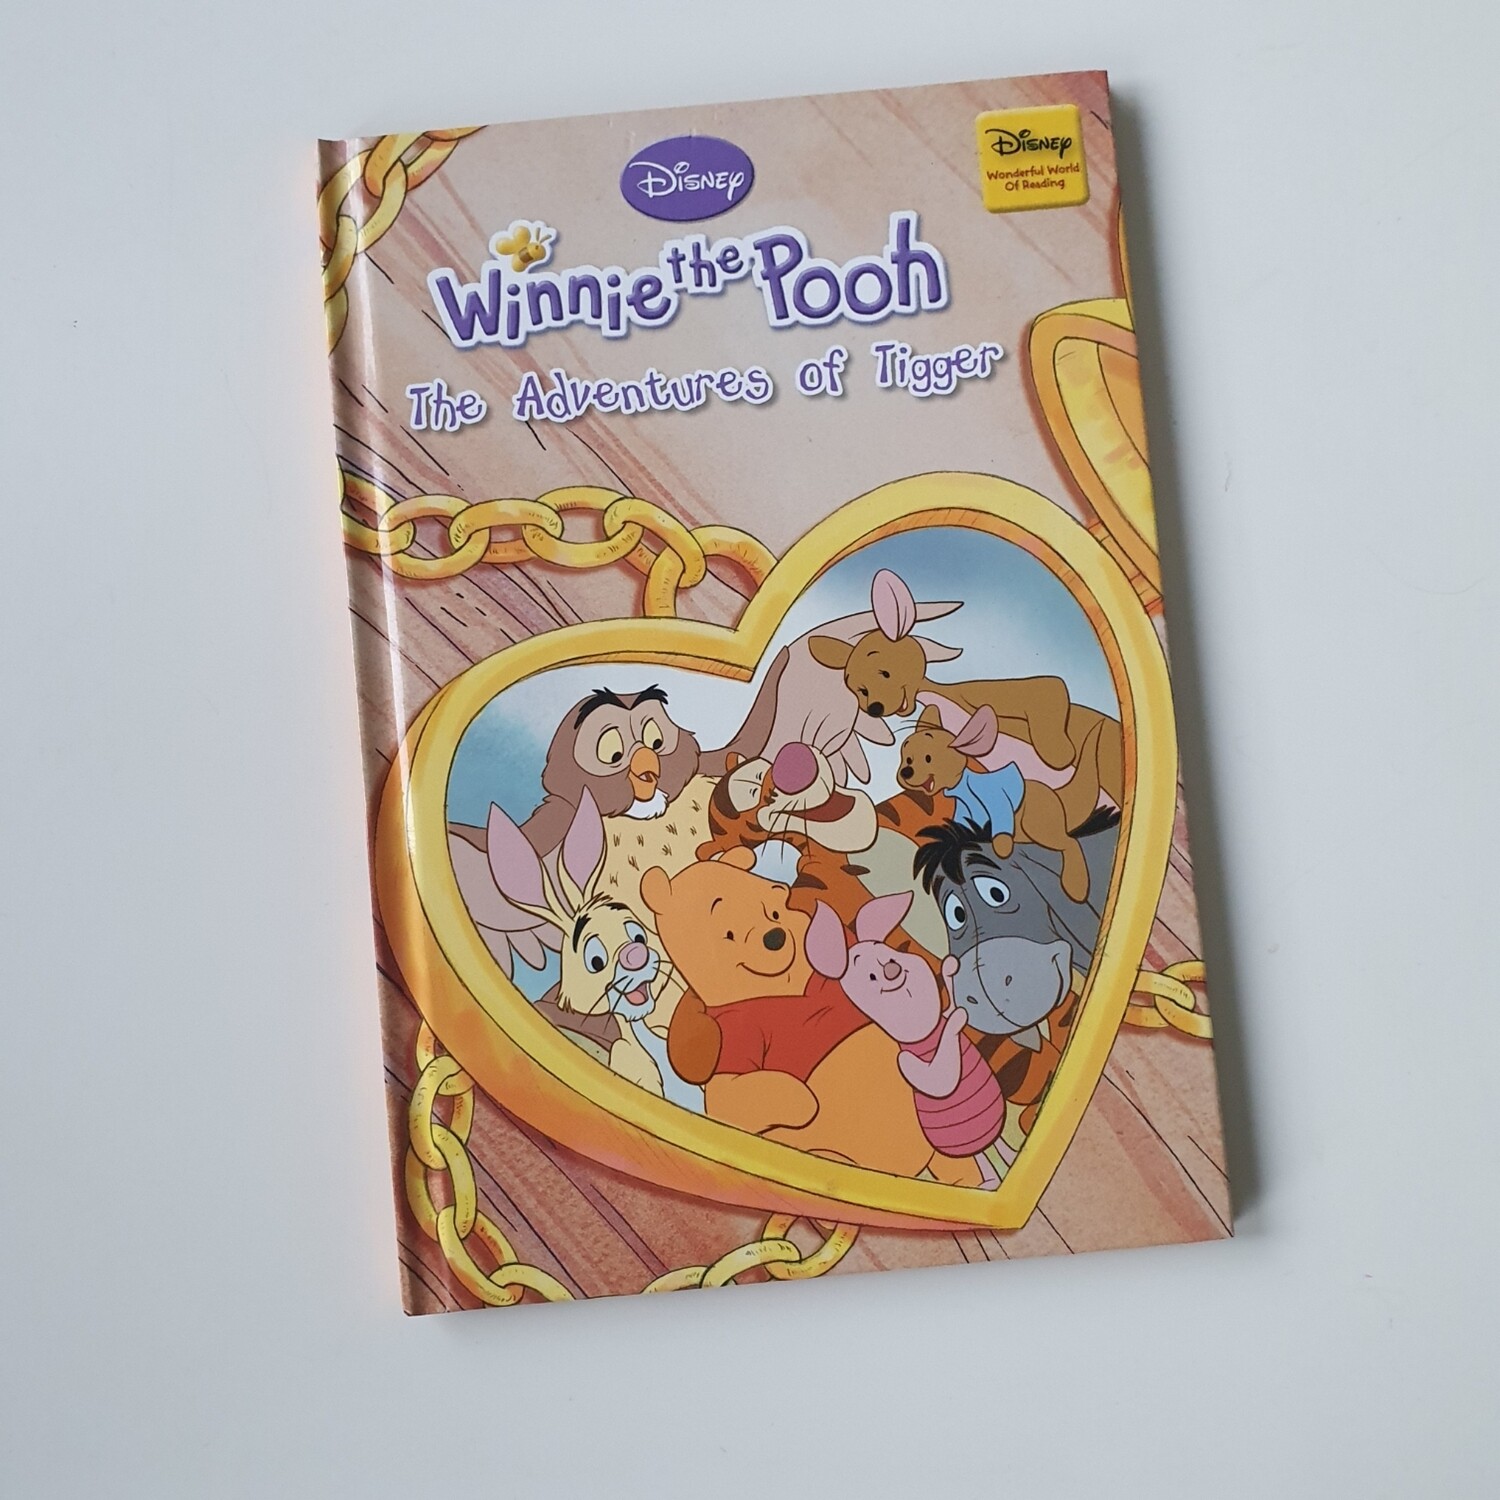 Winnie the Pooh - the adventures of Tigger Notebook